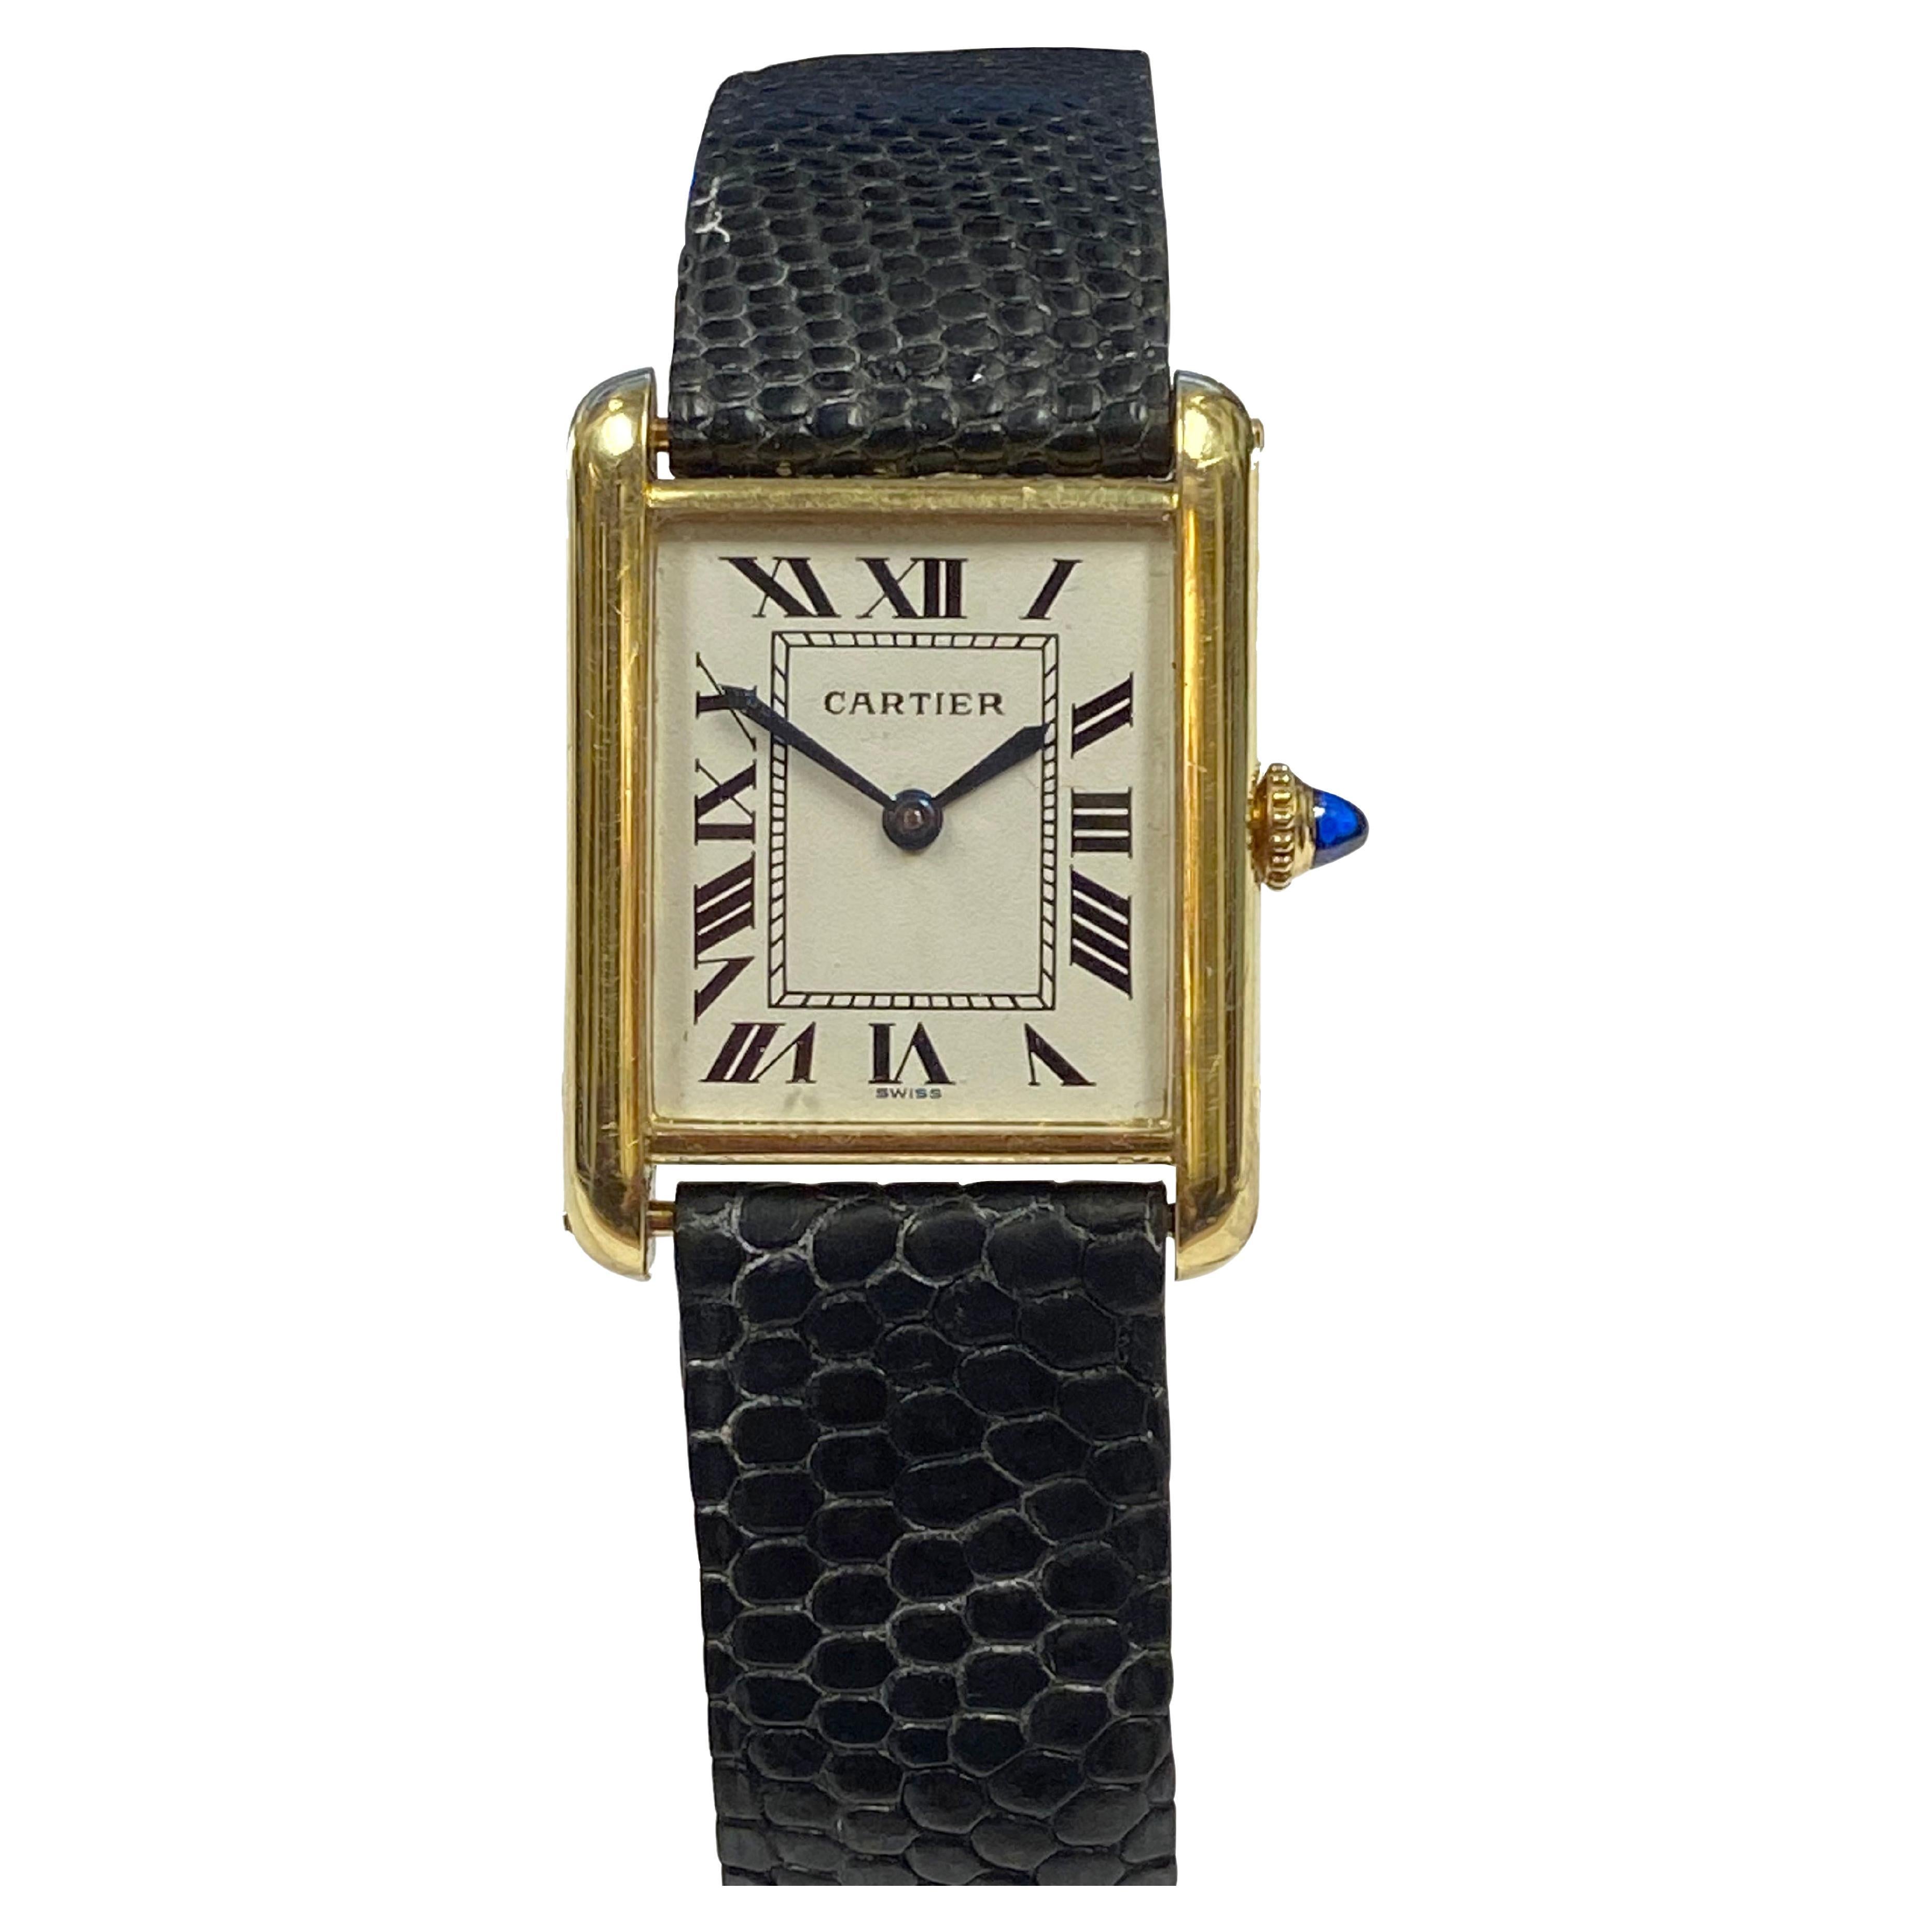 Cartier Classic Tank Vintage 1970 Yellow Gold Manual Wind Gents Size Wrist Watch